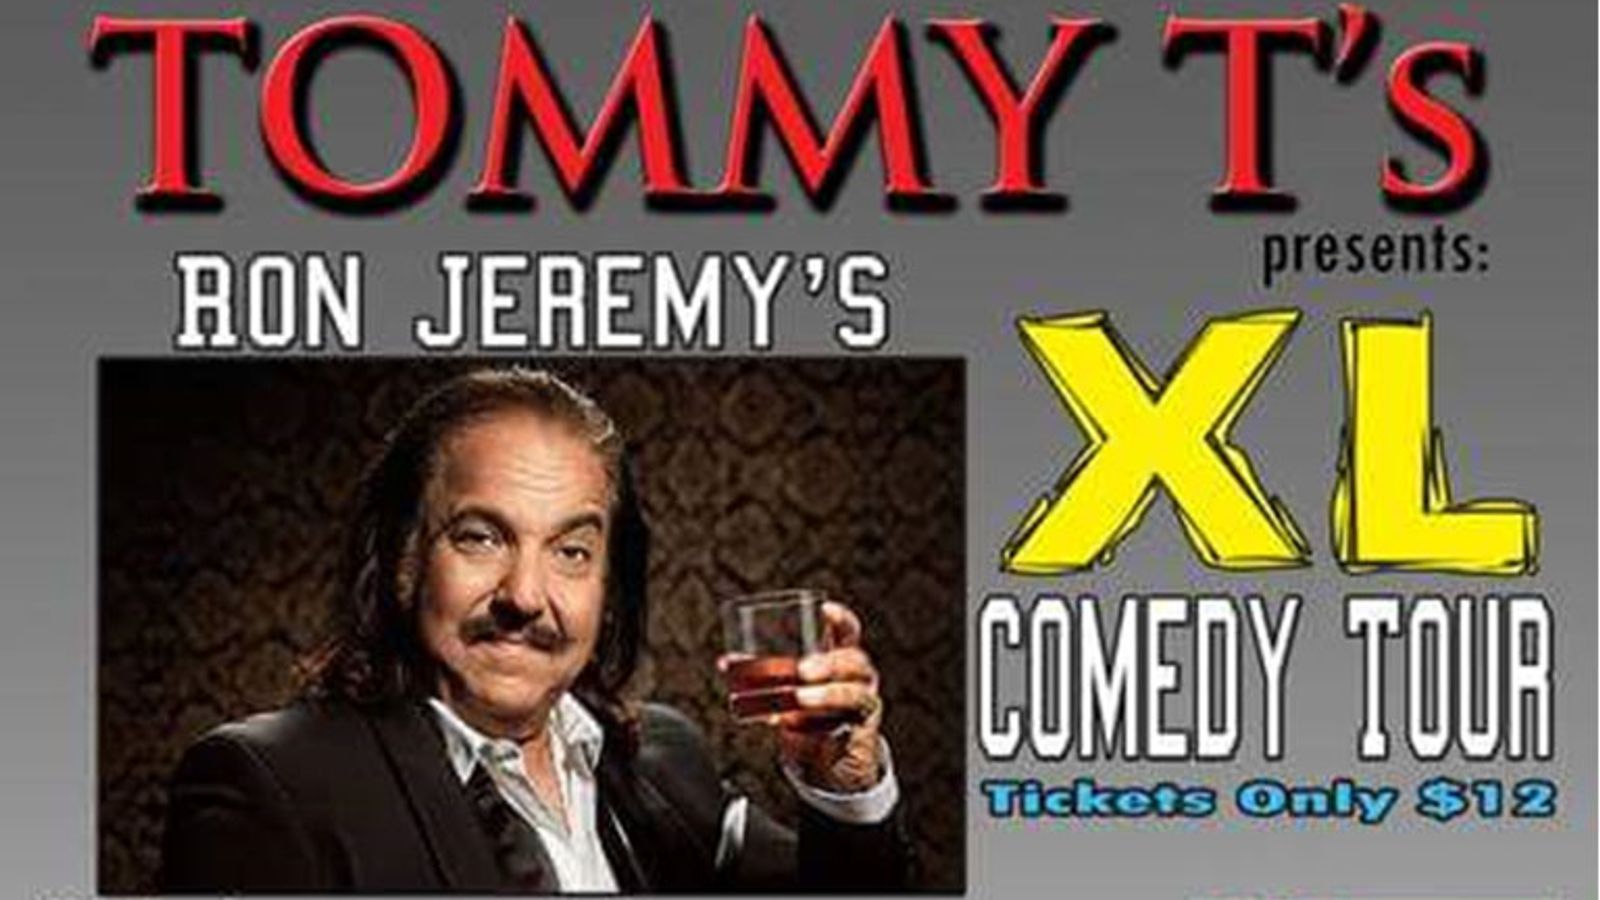 Catch Ron Jeremy Doing Stand-Up Comedy Saturday Night